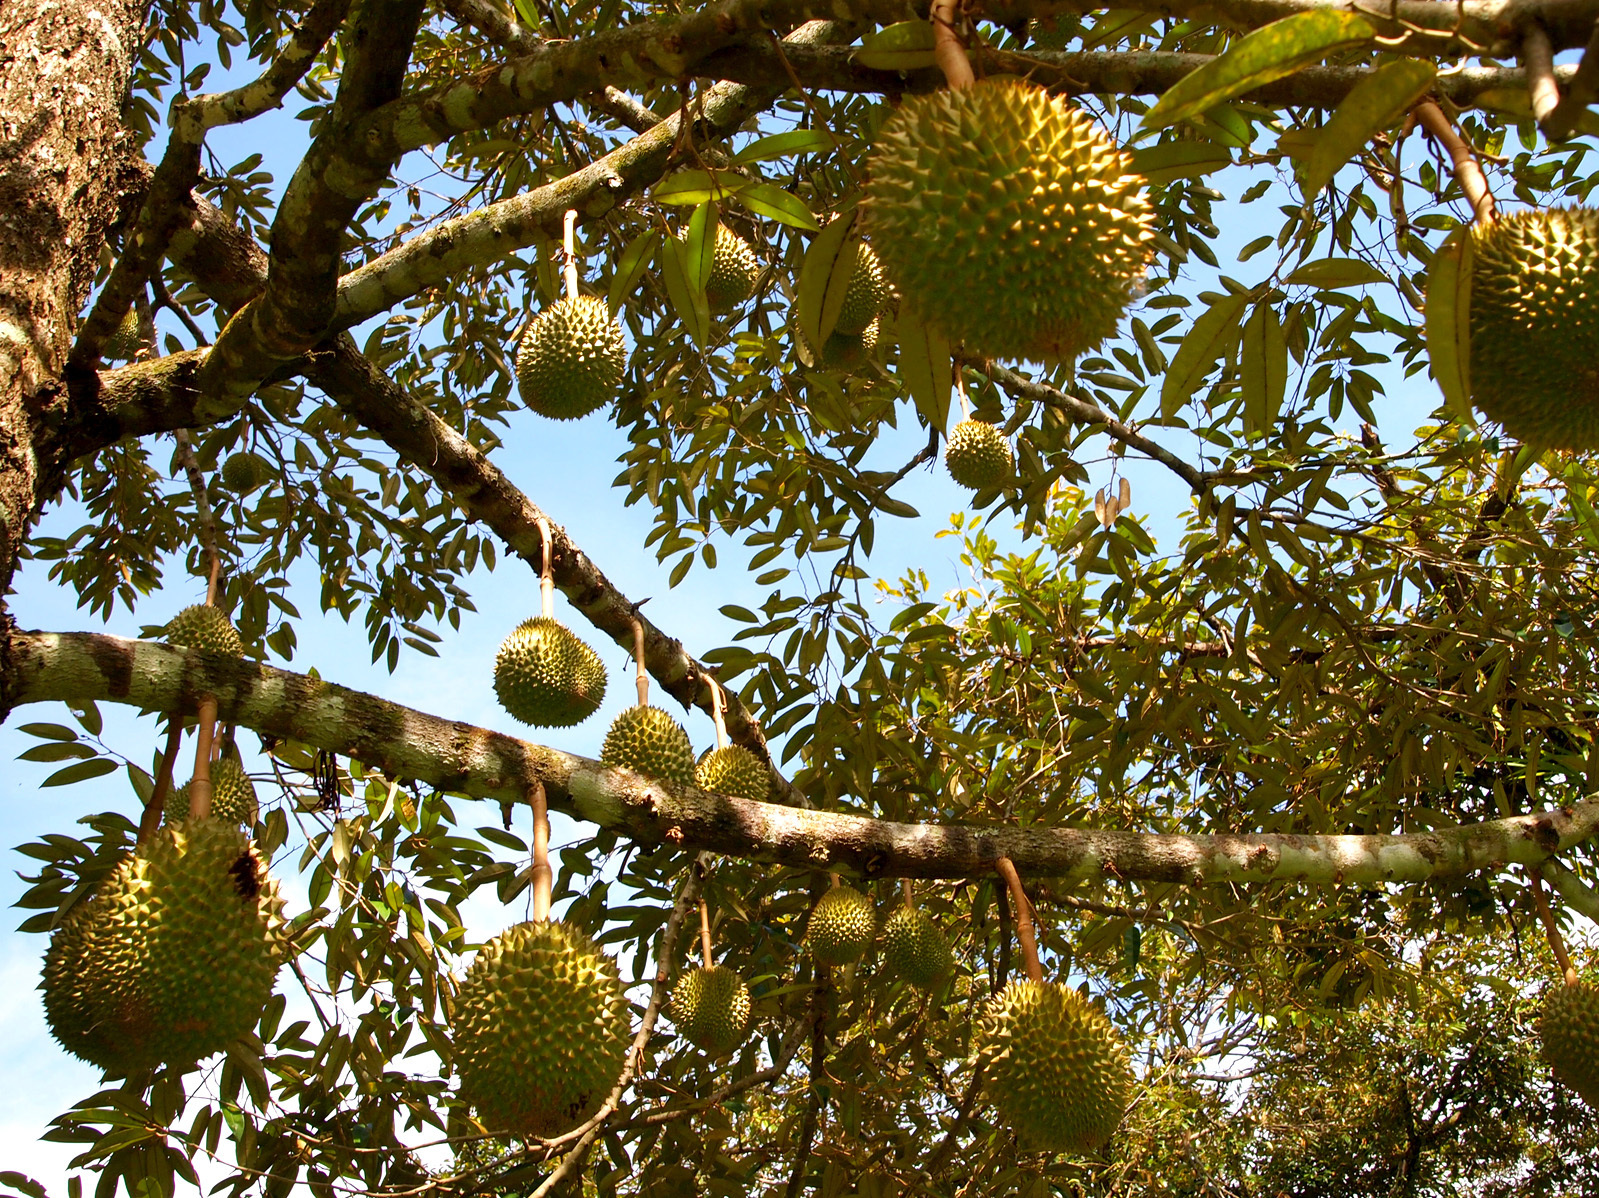 Durian fruit hangs from a tree. Courtesy of Lindsay Gasik